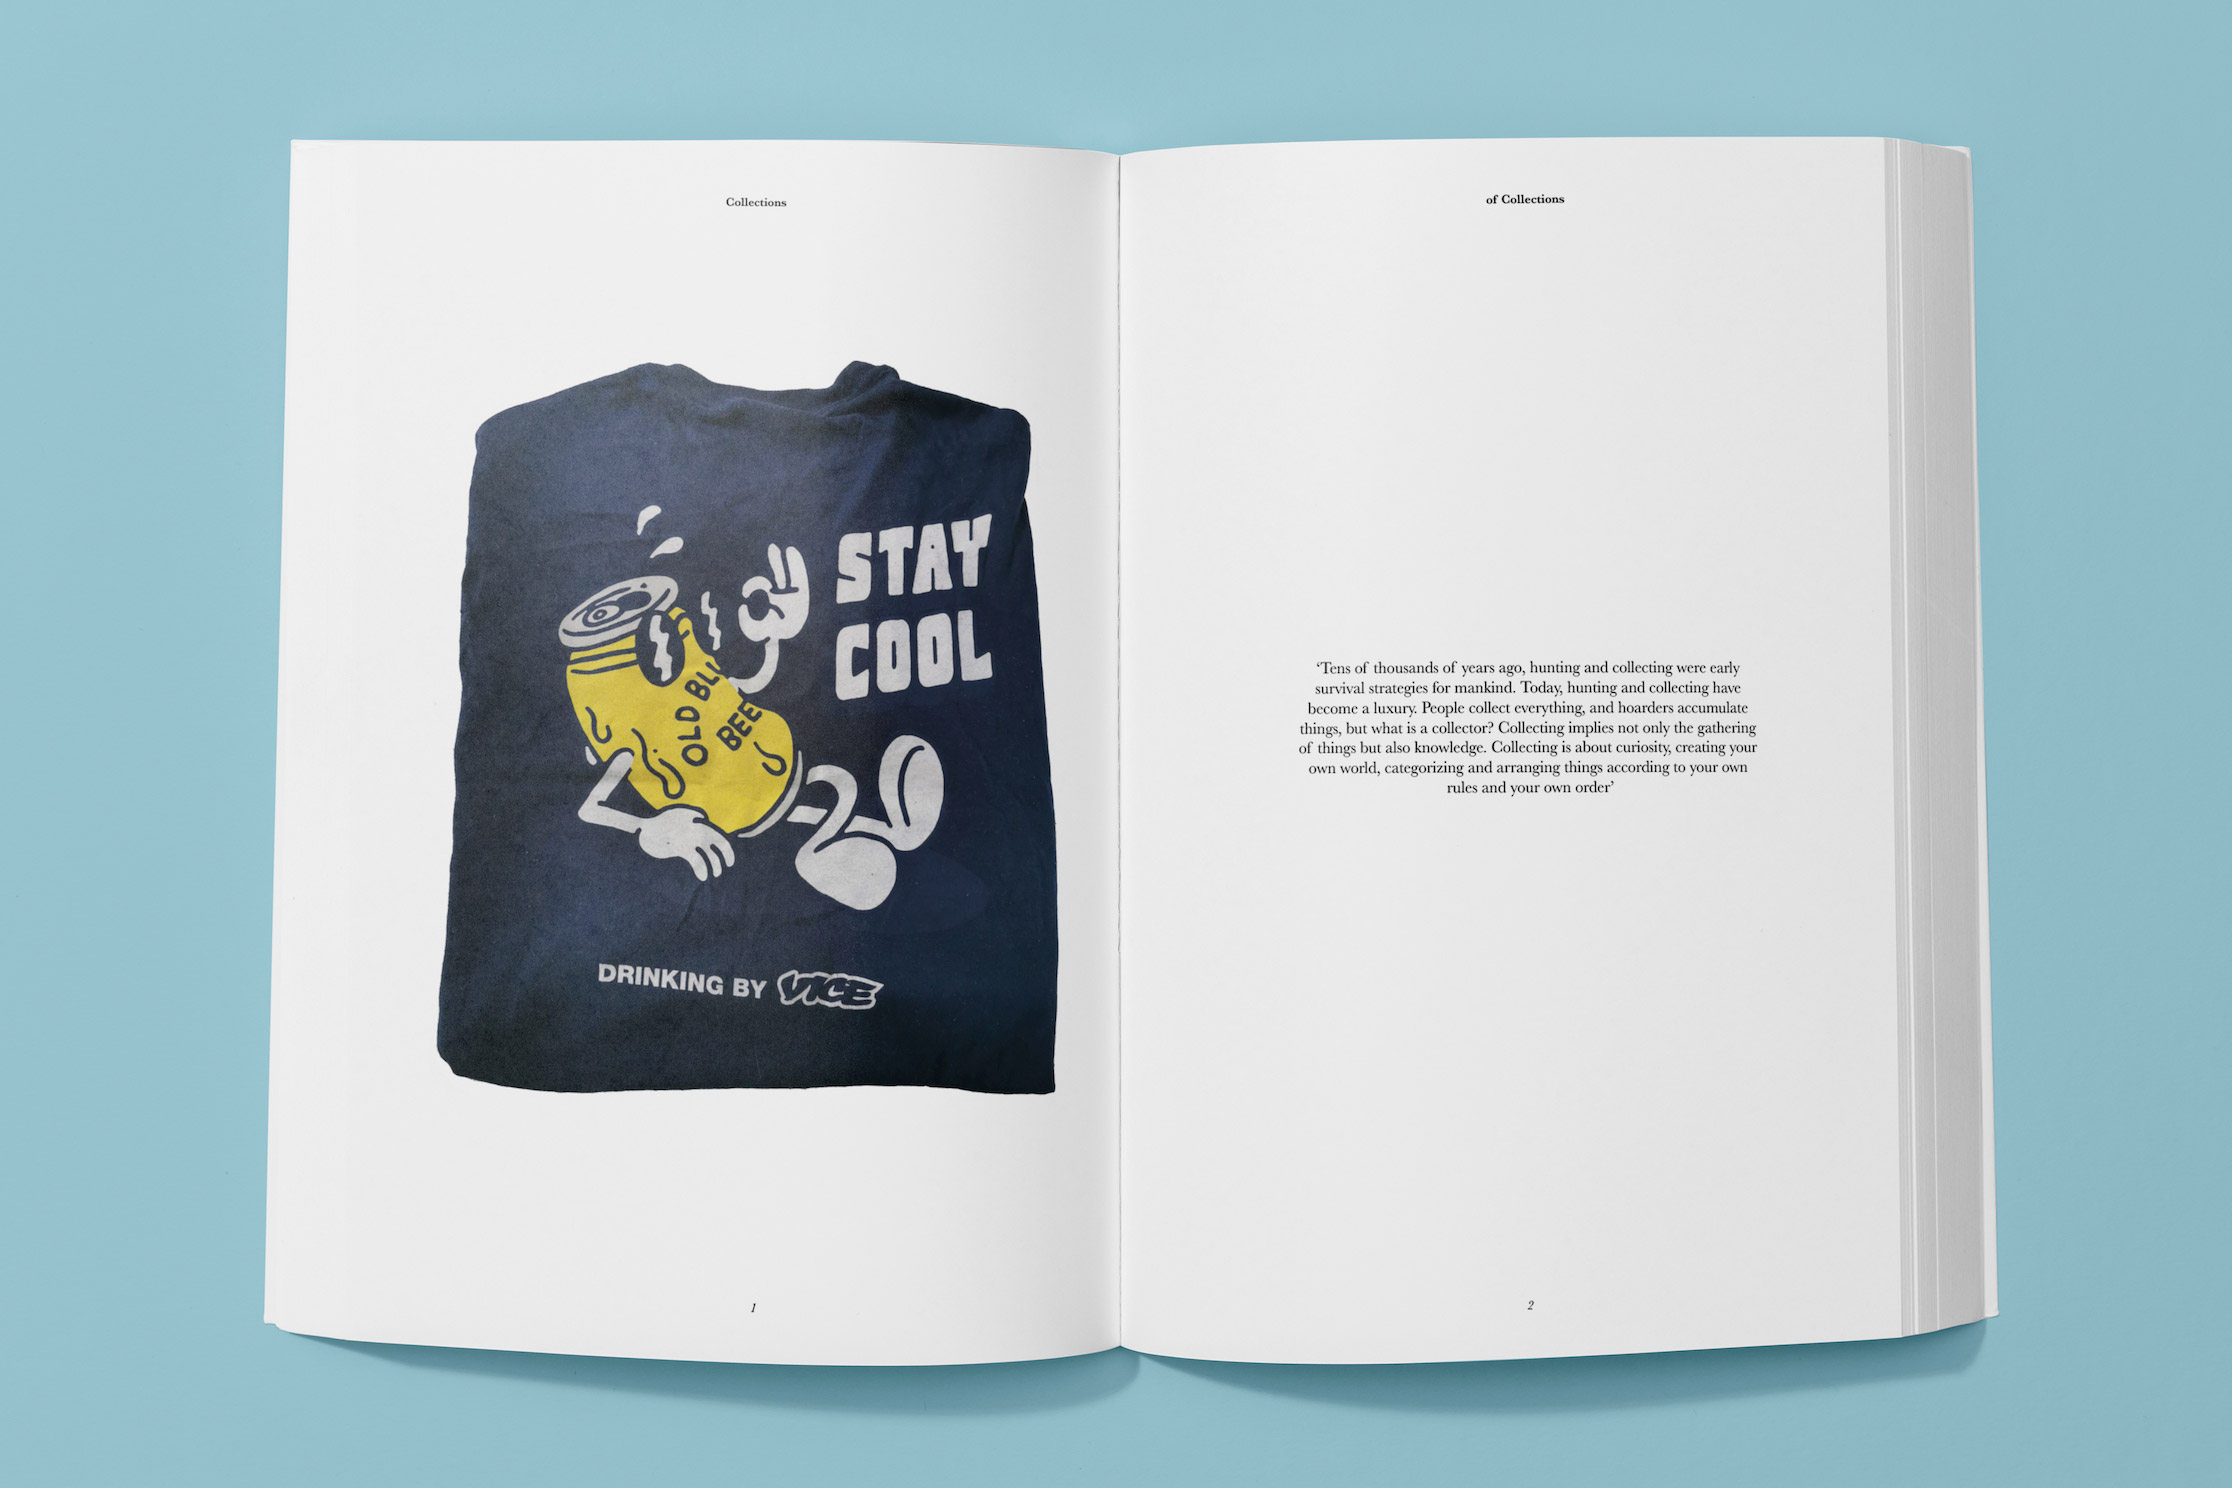 Mock-up print publication spreads featuring a photograph of a t-shirt